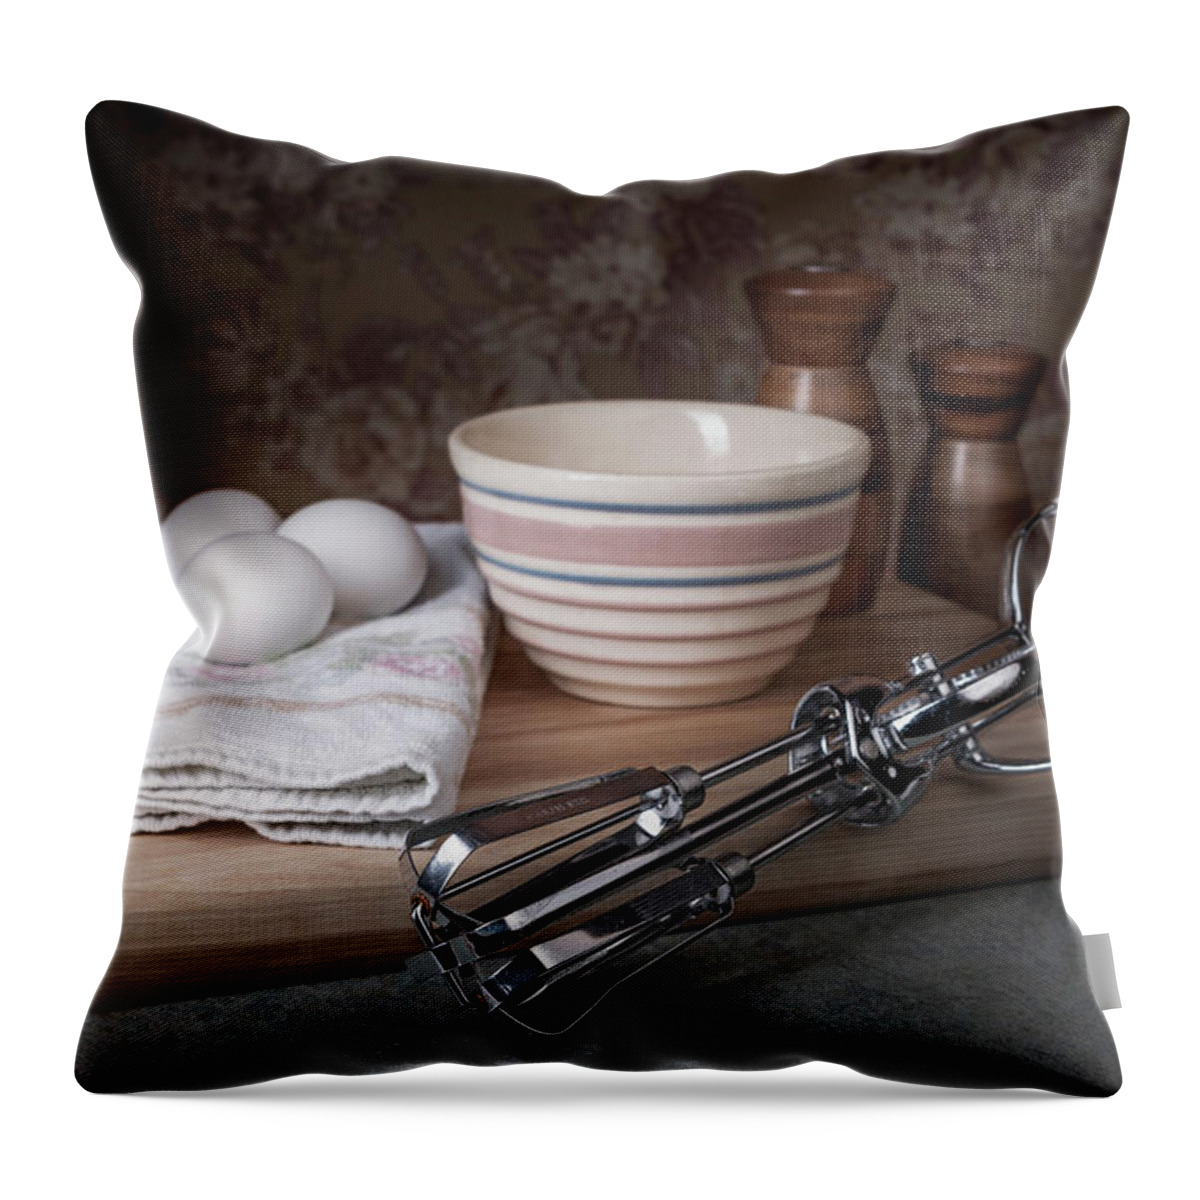 Eggs Throw Pillow featuring the photograph Eggbeater and Eggs Still Life by Tom Mc Nemar